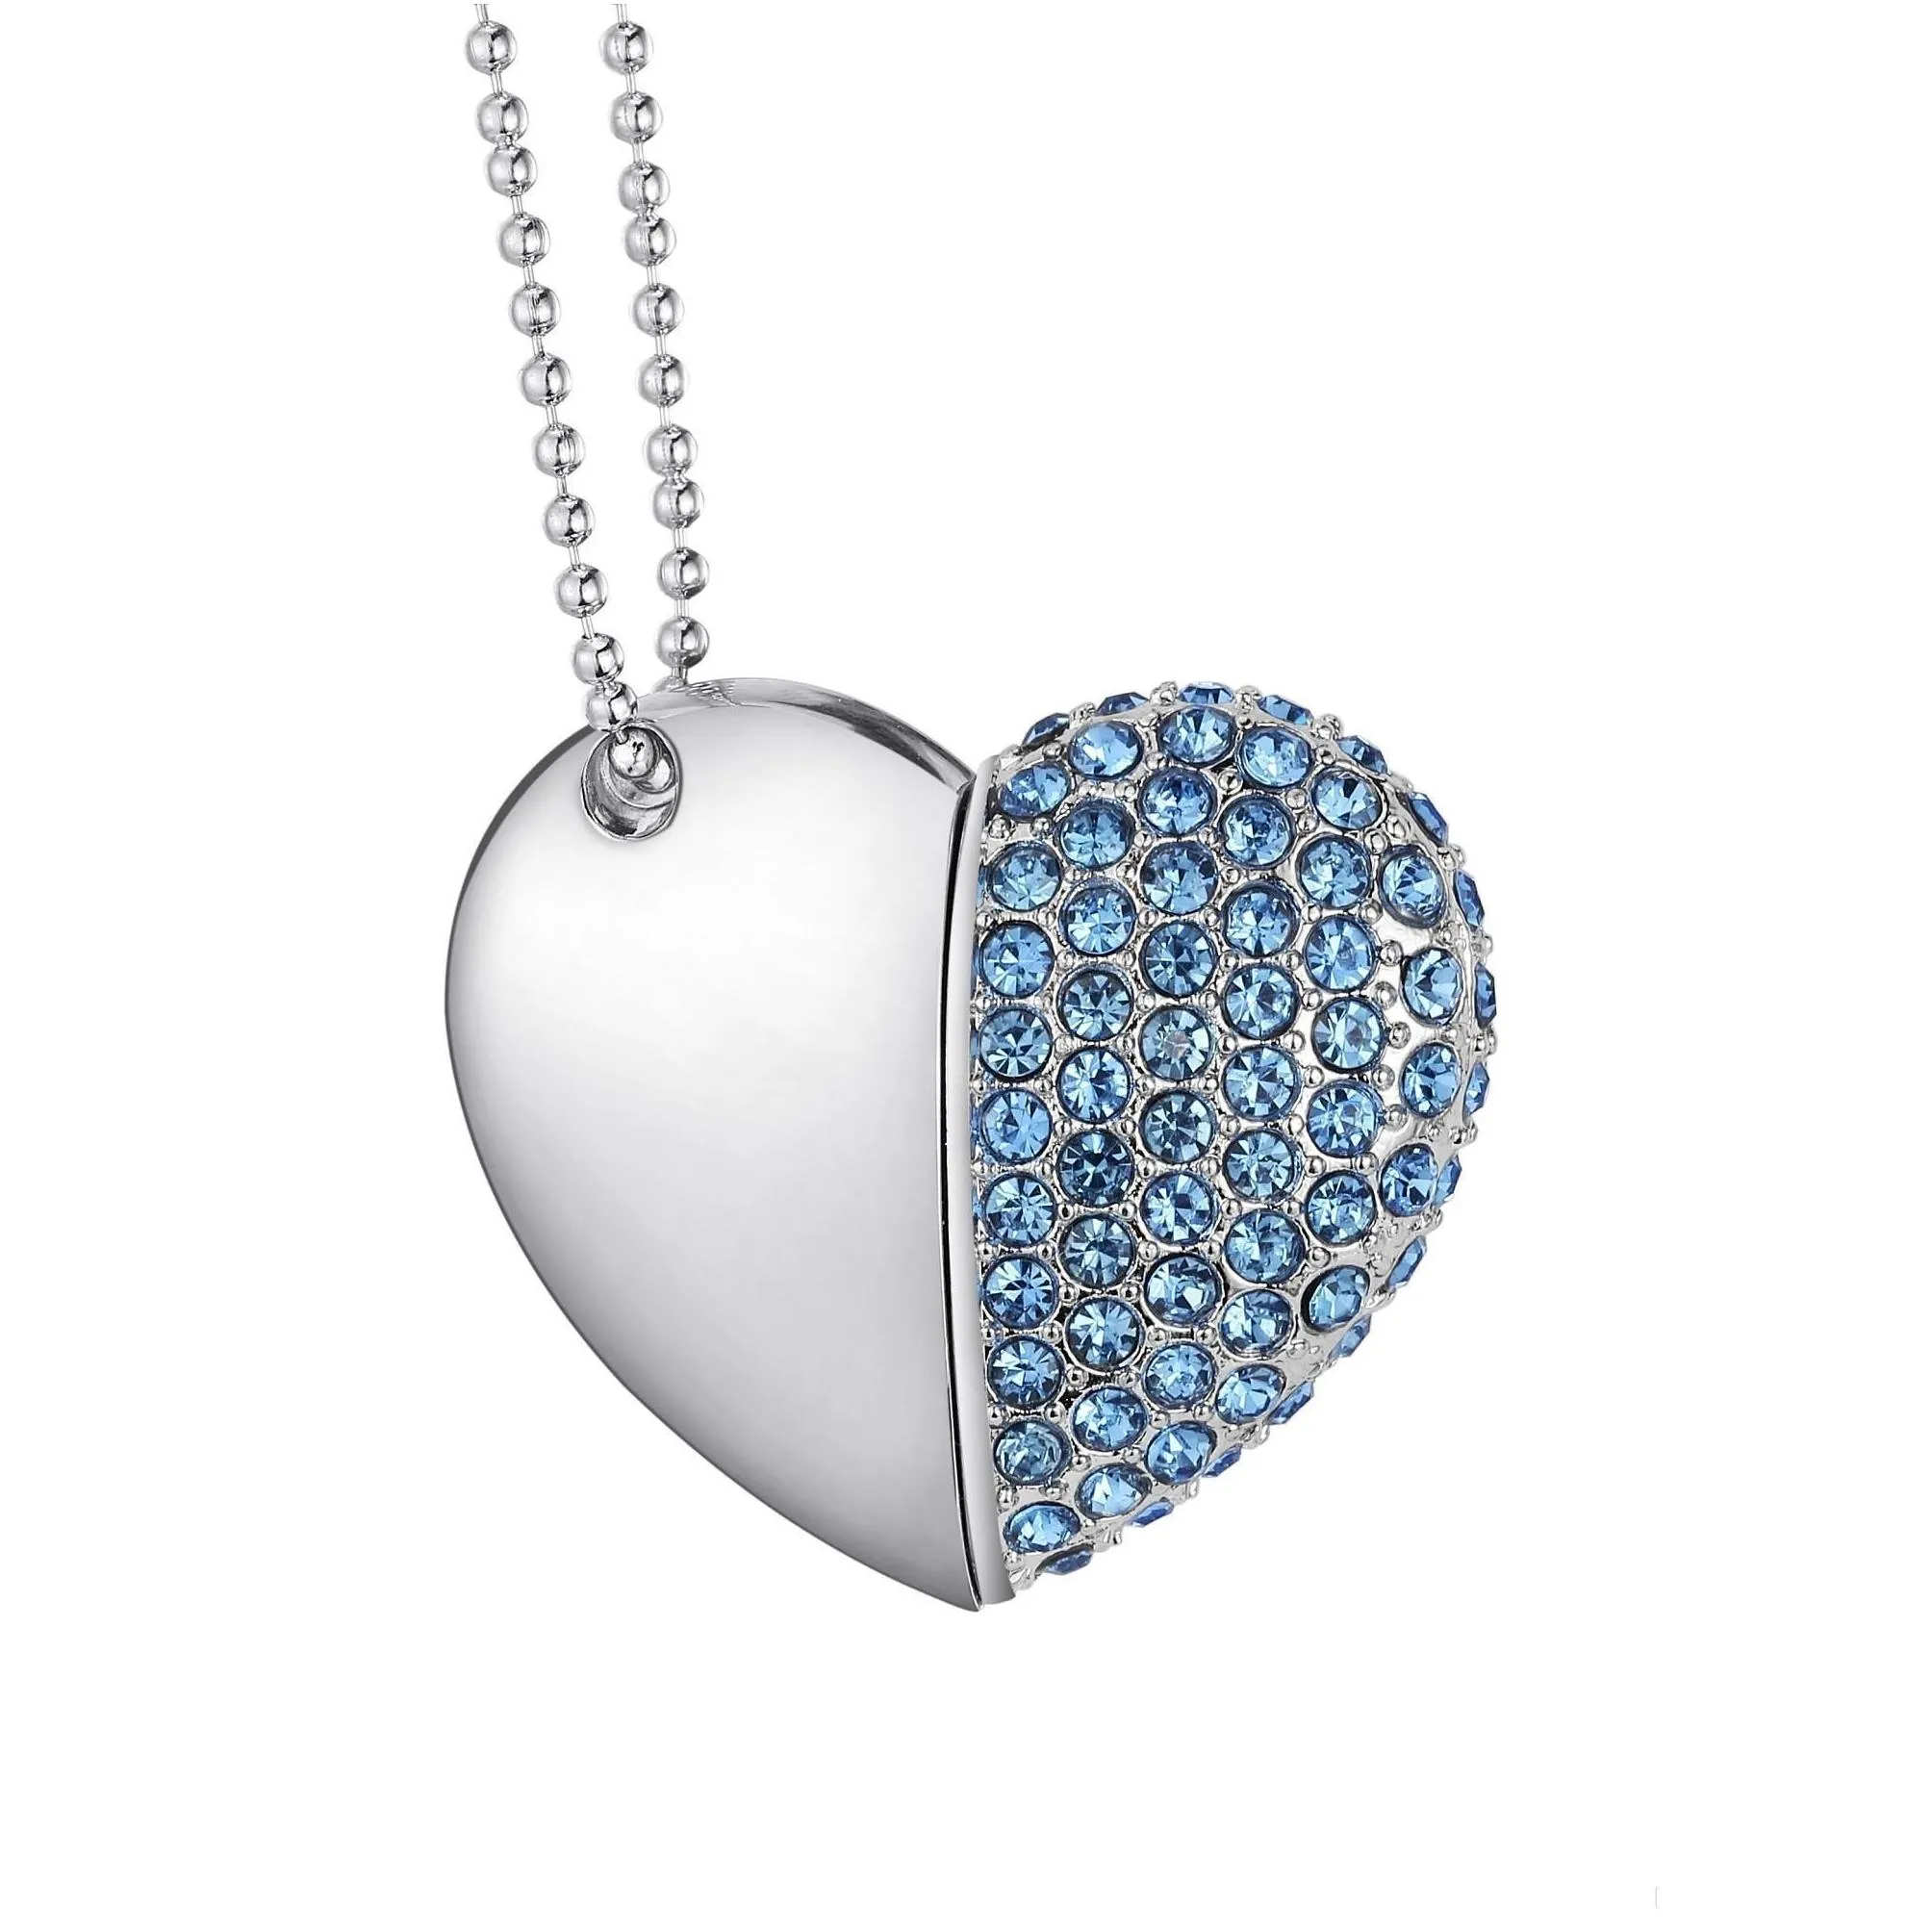 Design Real Capacity Crystal Heart USB 20 Flash Drive Memory Stick 16GB64GB Pendrive with Necklace6268671